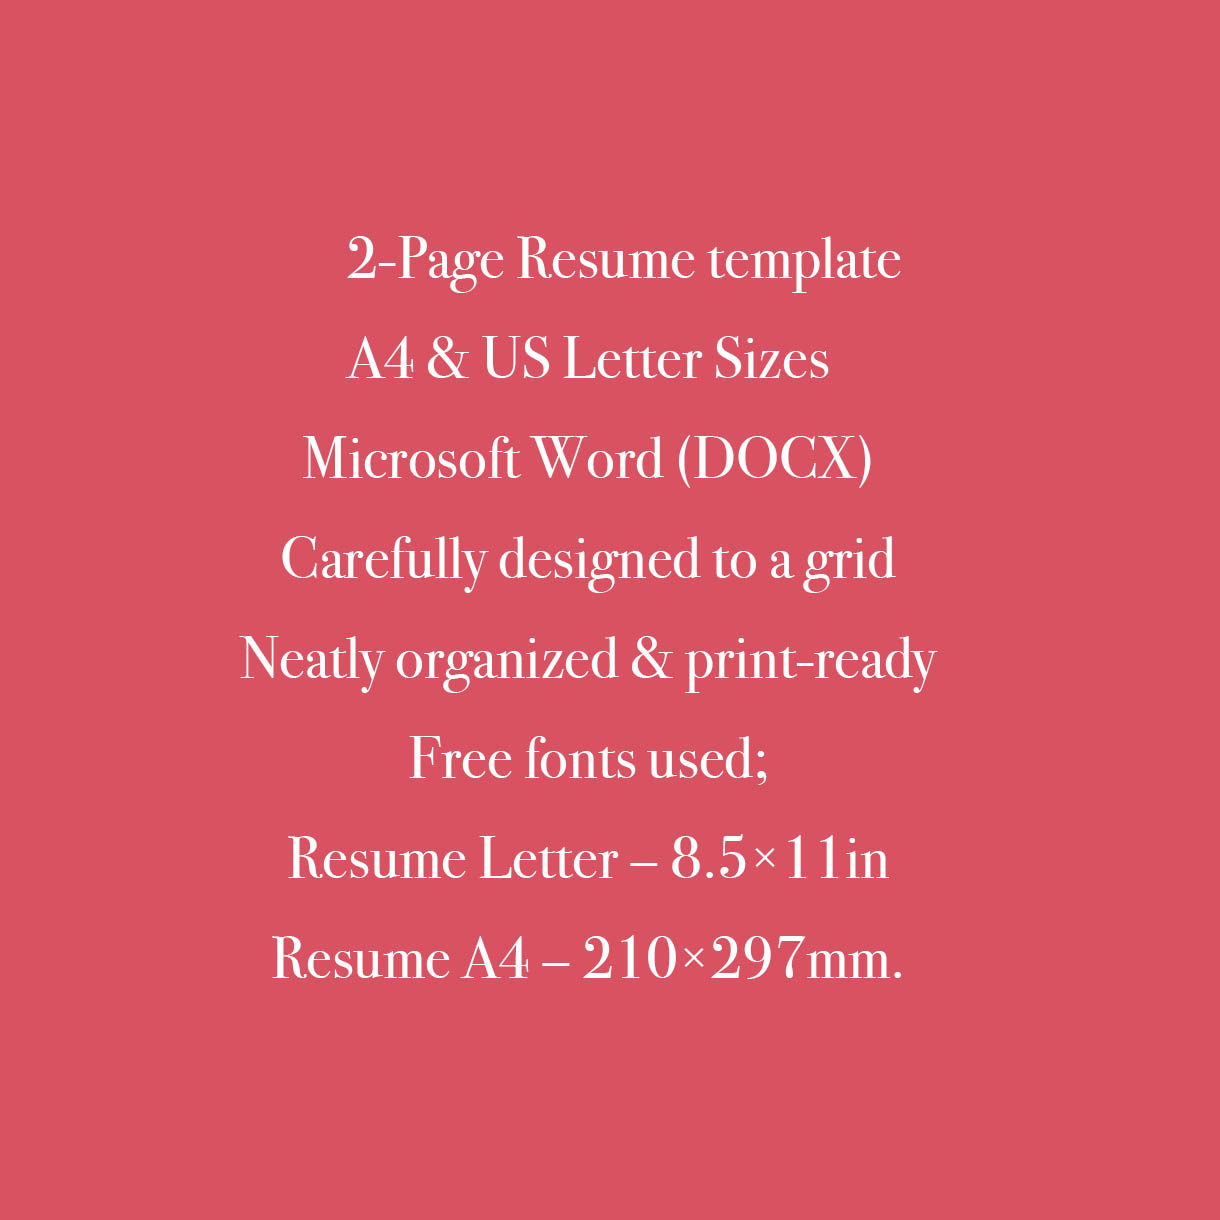 Art Gallery Resume Template CV cover image.